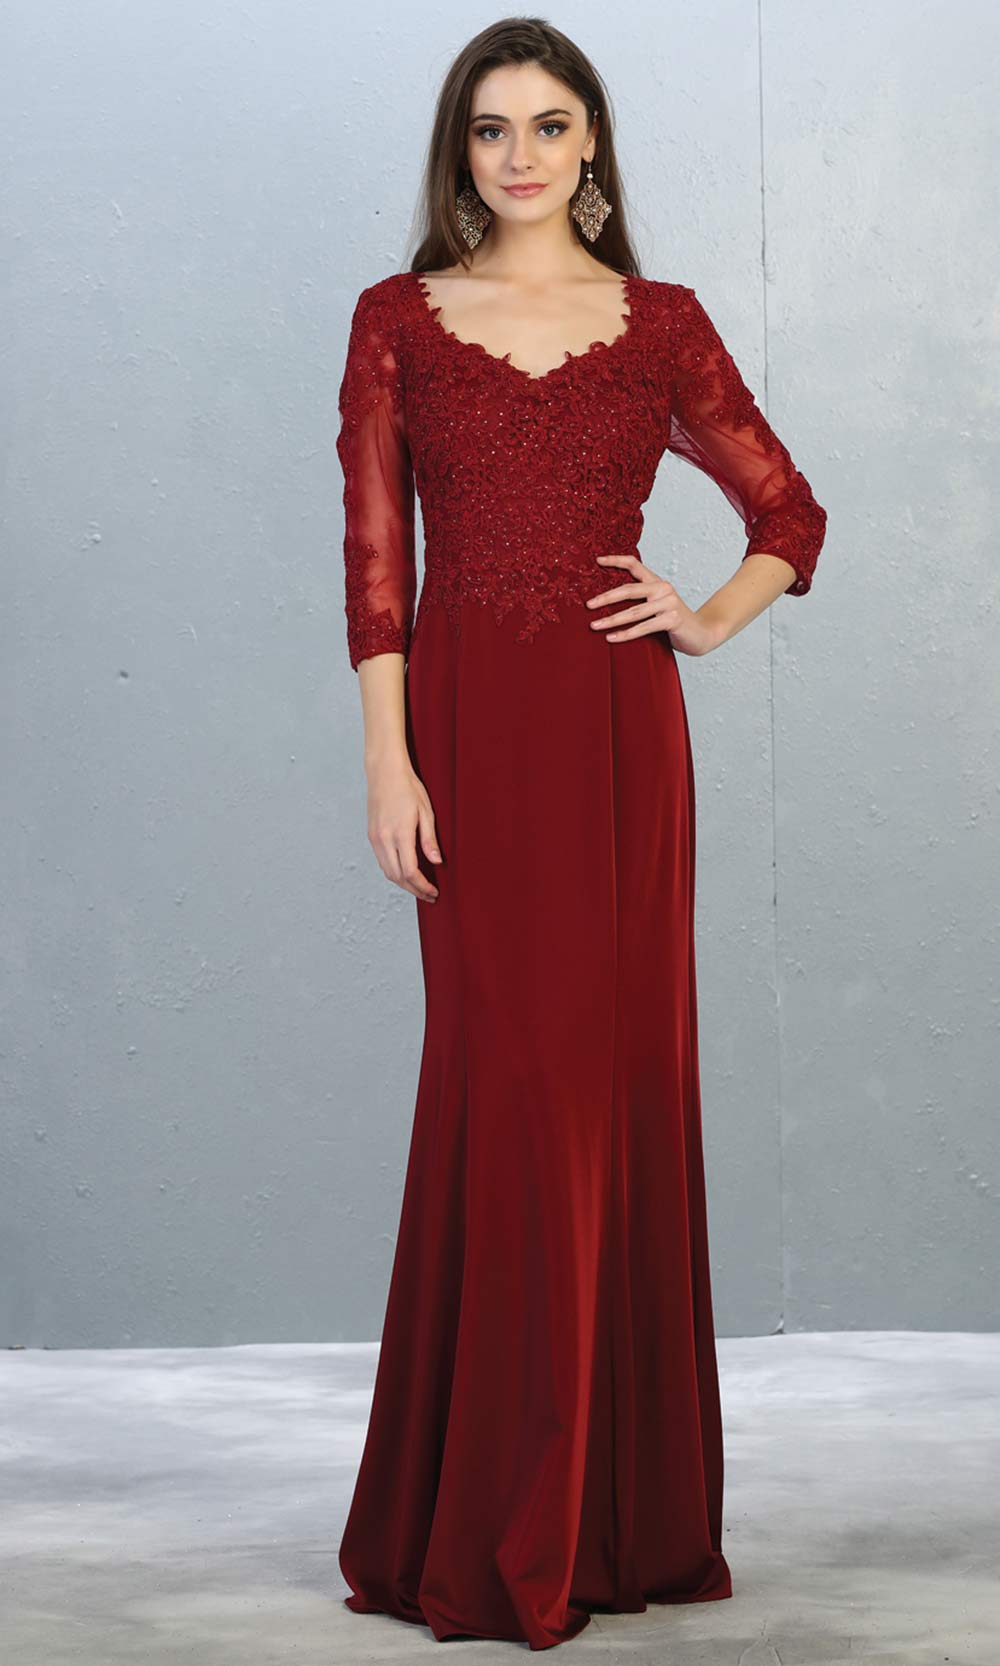 Mayqueen MQ1811 long burgundy red modest flowy dress w/ long sleeves. Dark red chiffon & lace top is perfect for  mother of the bride, formal wedding guest, indowestern gown, evening party dress, dark red muslim party dress. Plus sizes avail.jpg